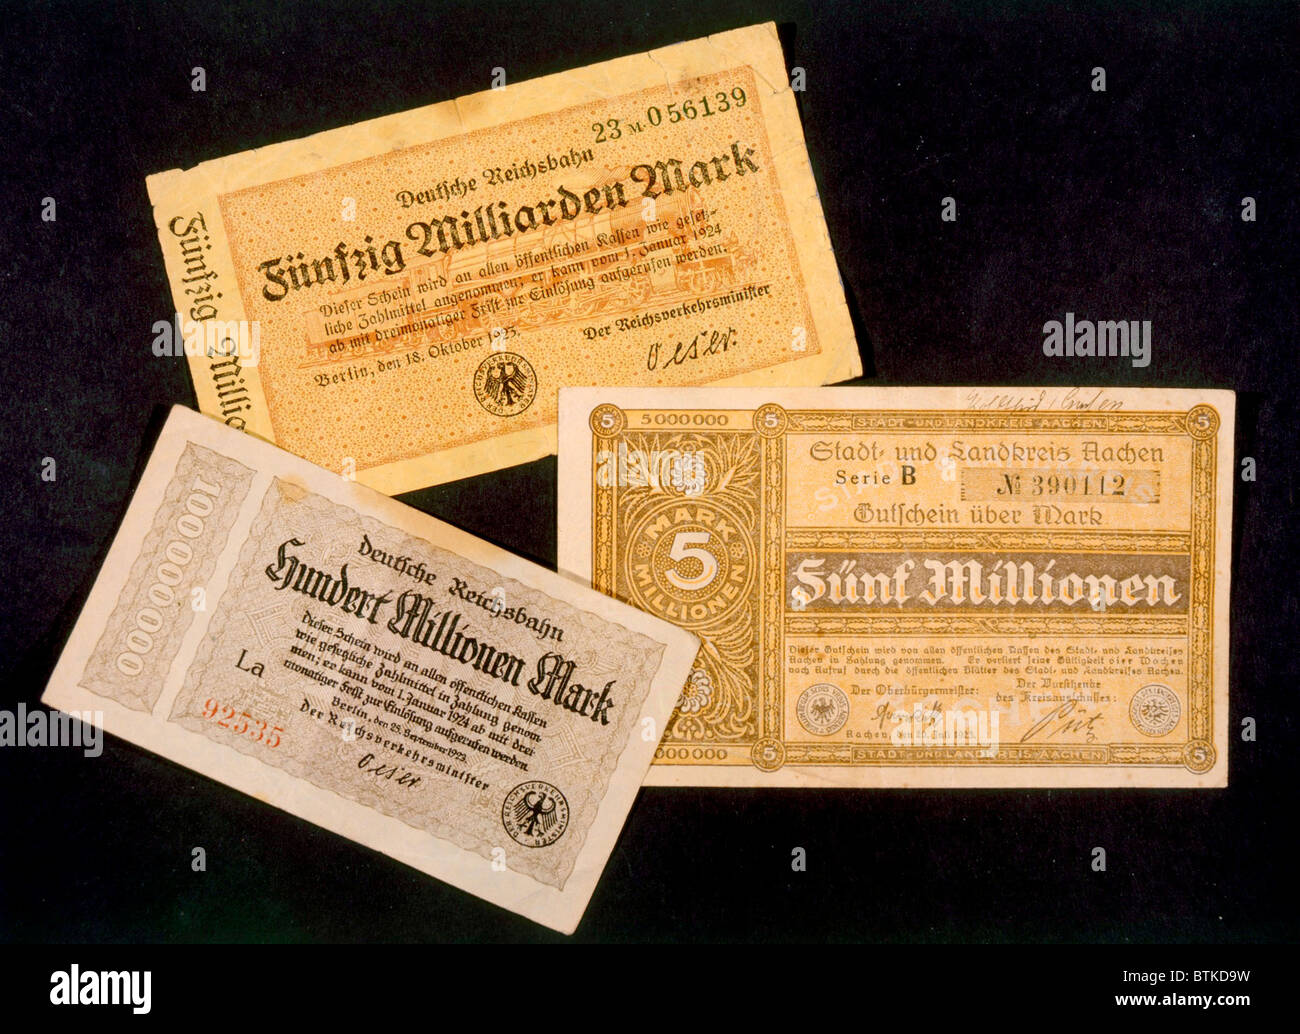 German currency issued during the period of inflation, 1923-1924 Stock Photo